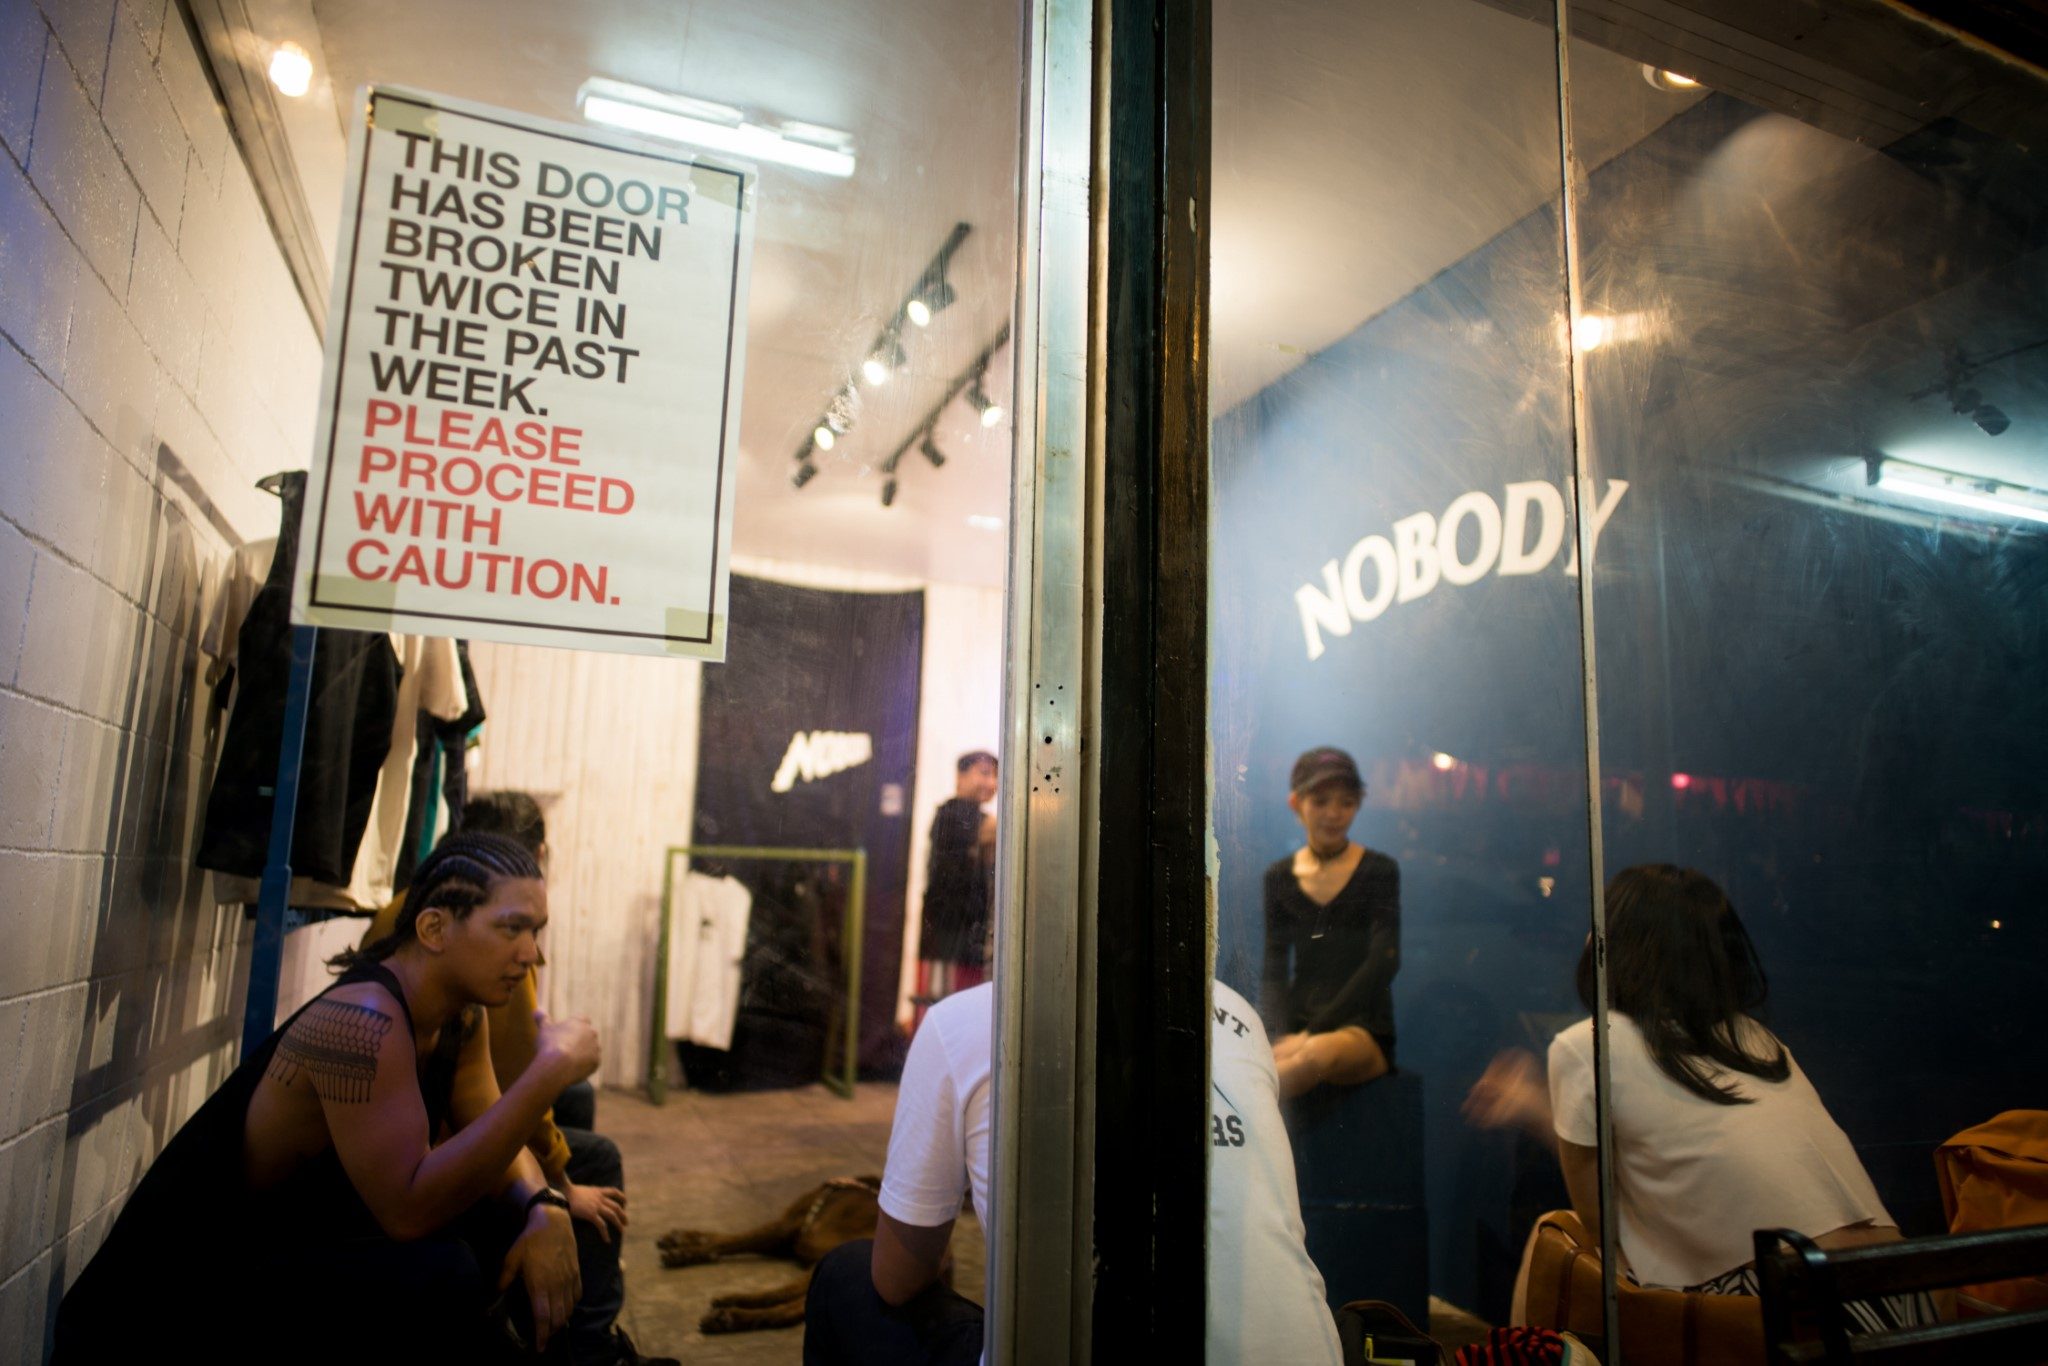 POP-UP. Nobody set up shop temporarily at Cubao Ex, but are hoping to open a space of their own. Photo by Martin San Diego/Rappler 